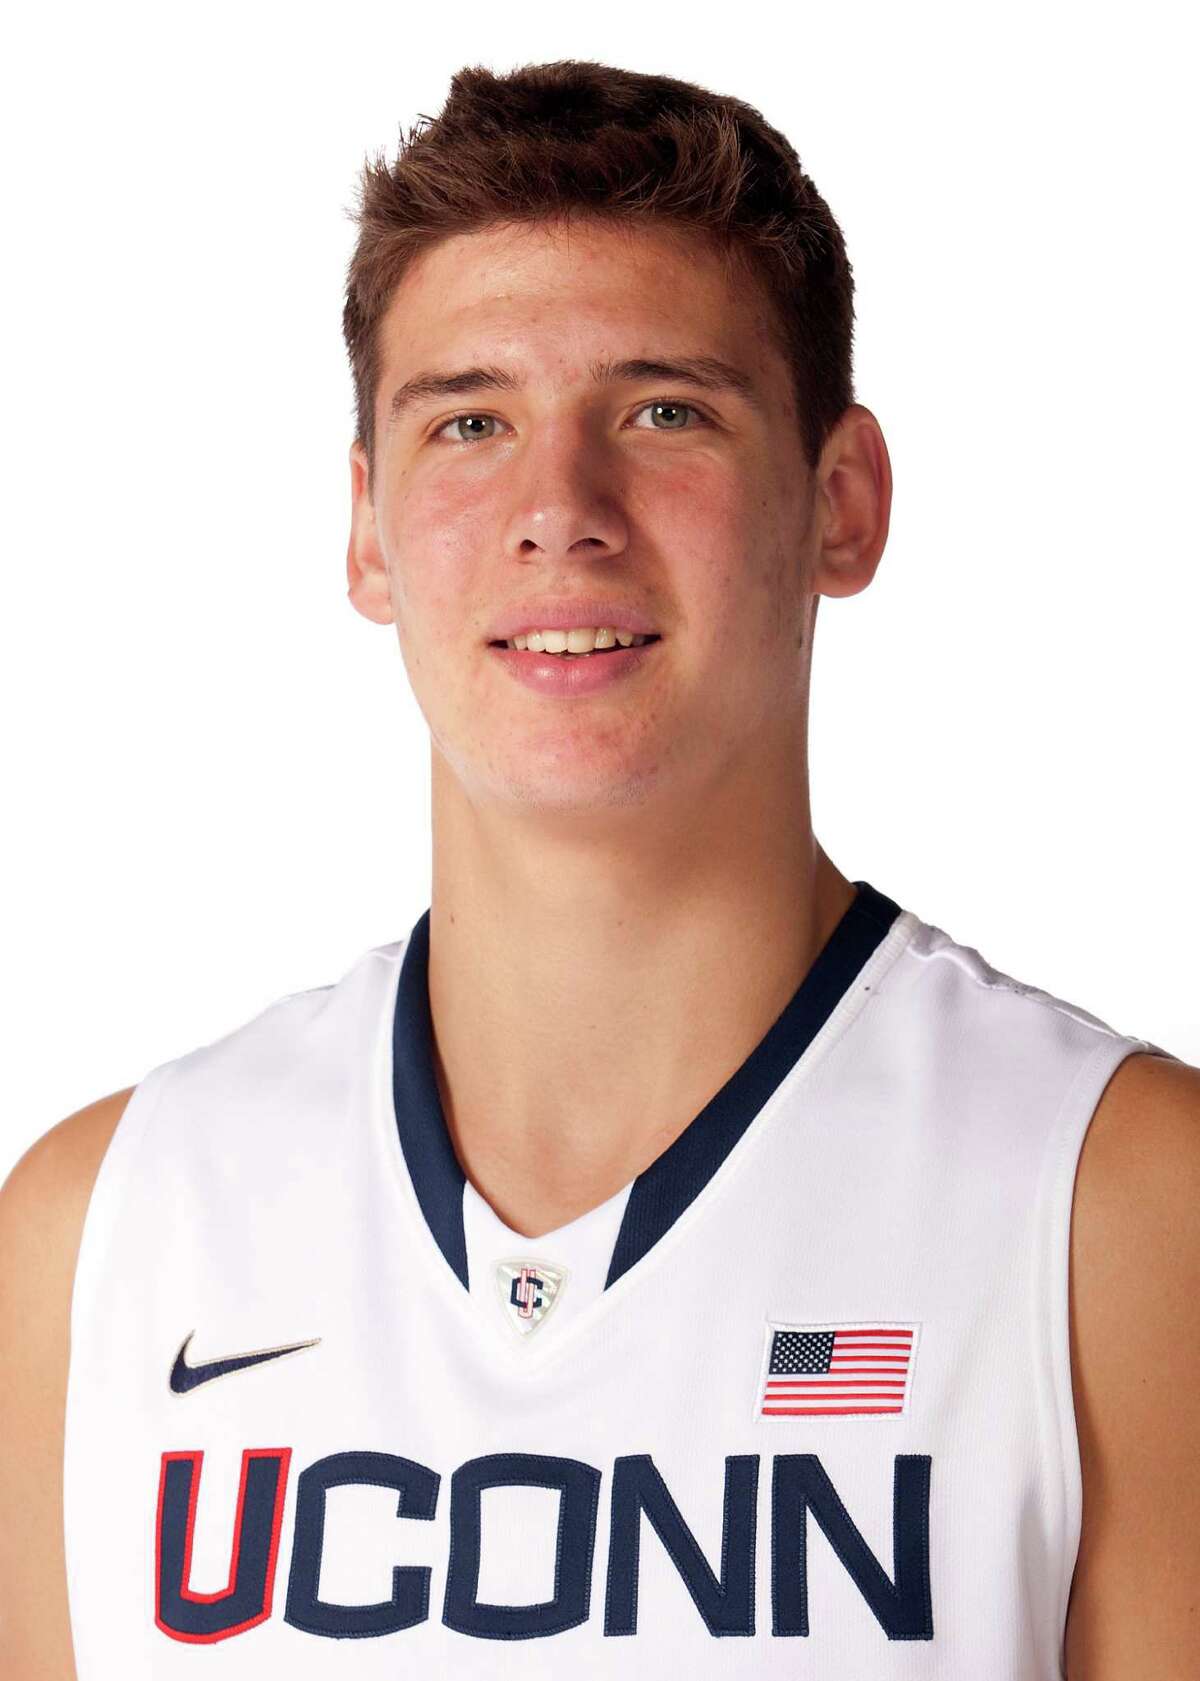 This Sept. 24, 2011 photo released by the University of Connecticut Athletic Department shows men's basketball player Tyler Olander. (AP Photo/University of Connecticut Athletic Department)